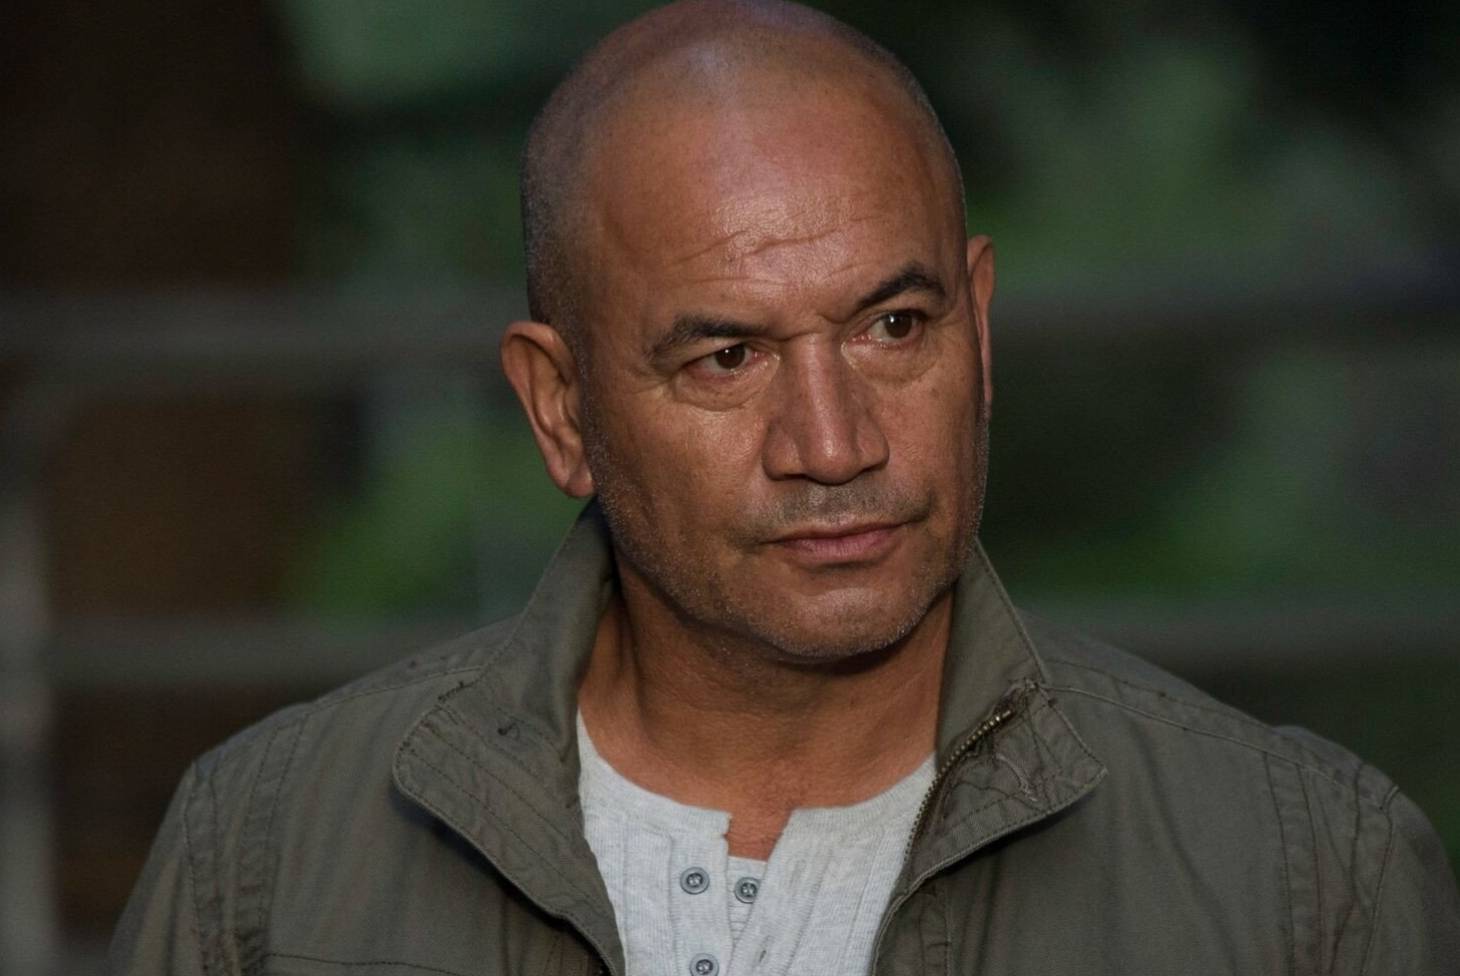 Temuera Morrison: net worth, movies, web series, personal life and girlfriend